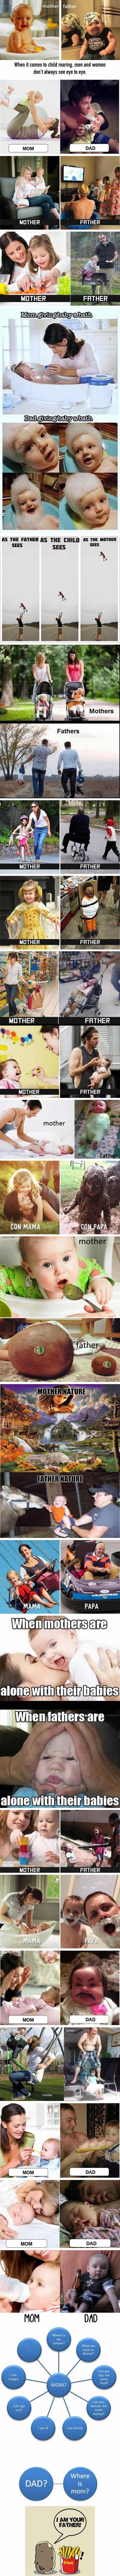 the difference between mothers and fathers as told by their kids